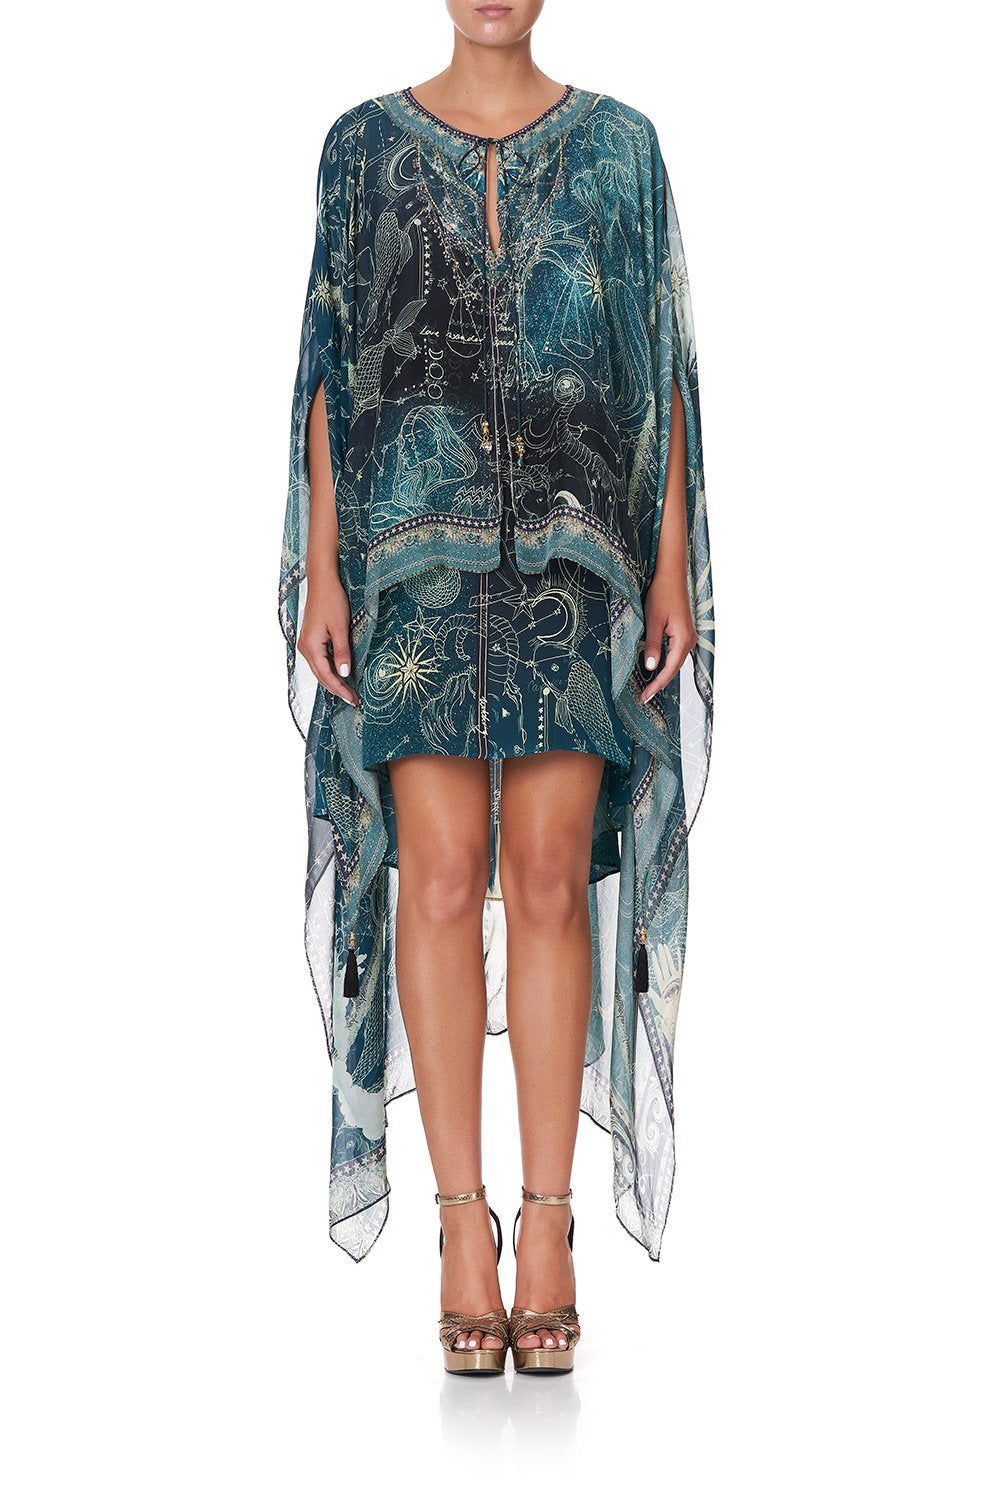 LONG SHEER OVERLAY DRESS INTO THE MYSTIQUE